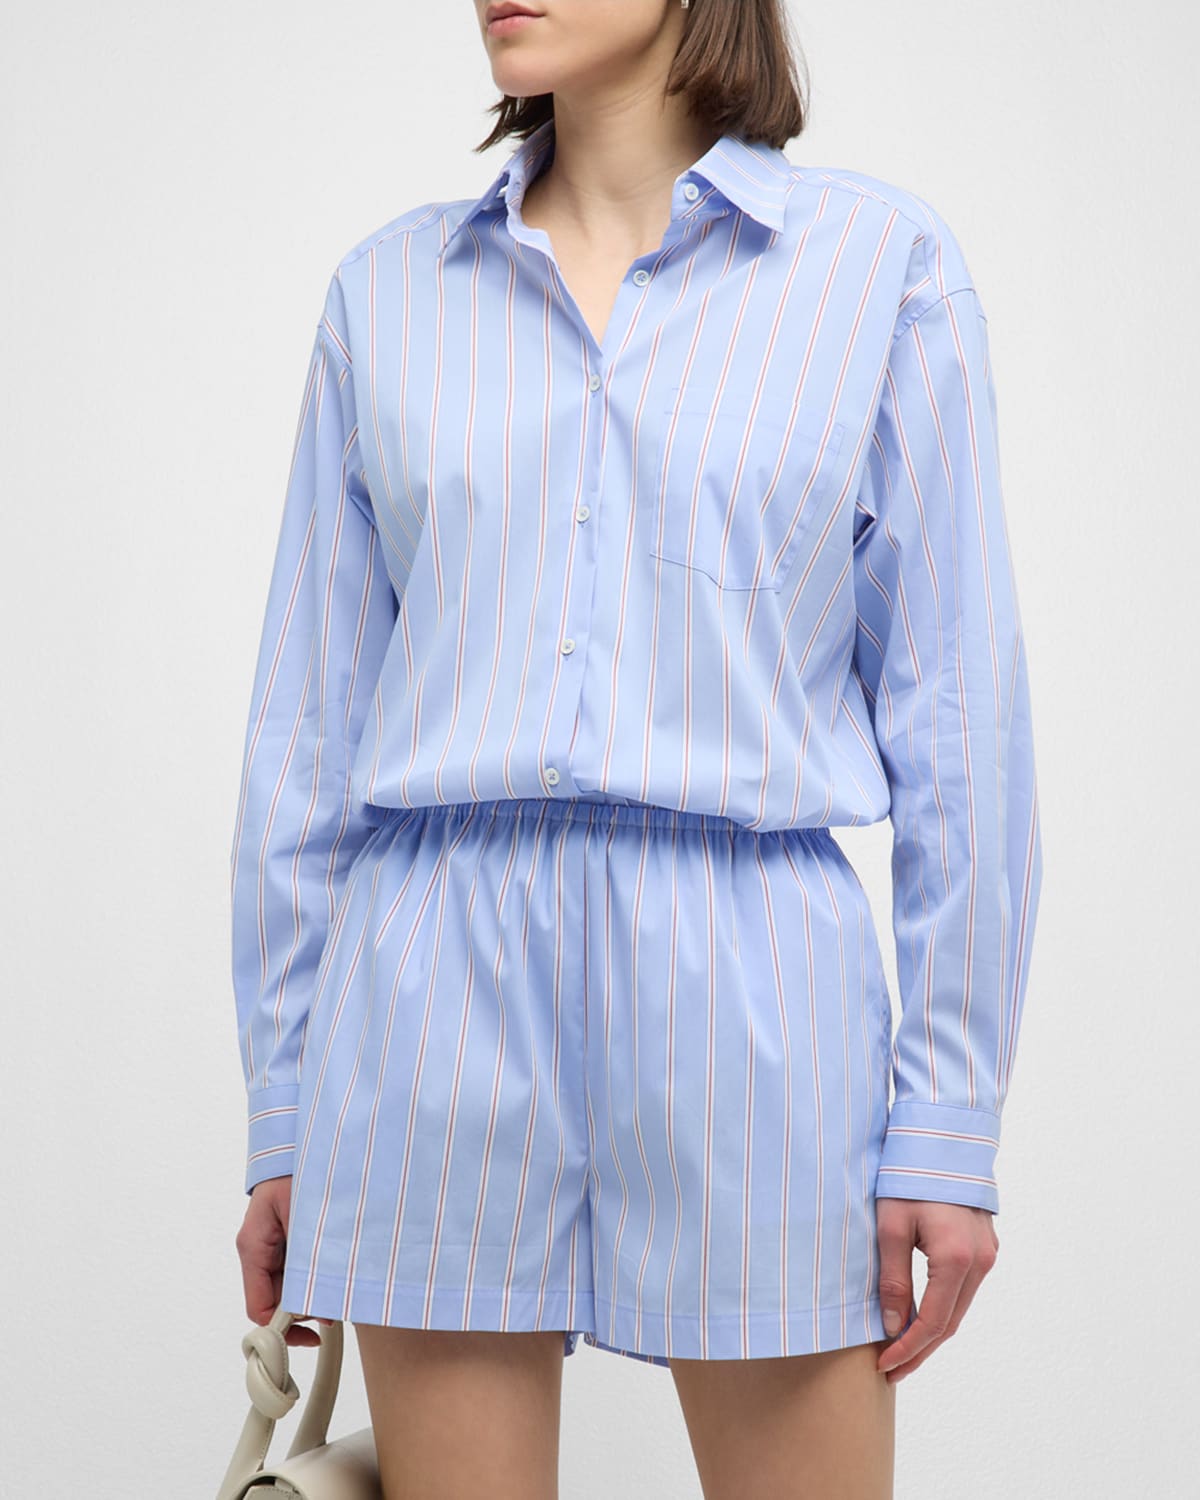 Solid & Striped The Jancy Striped Blouse In Hot Spring Stripe